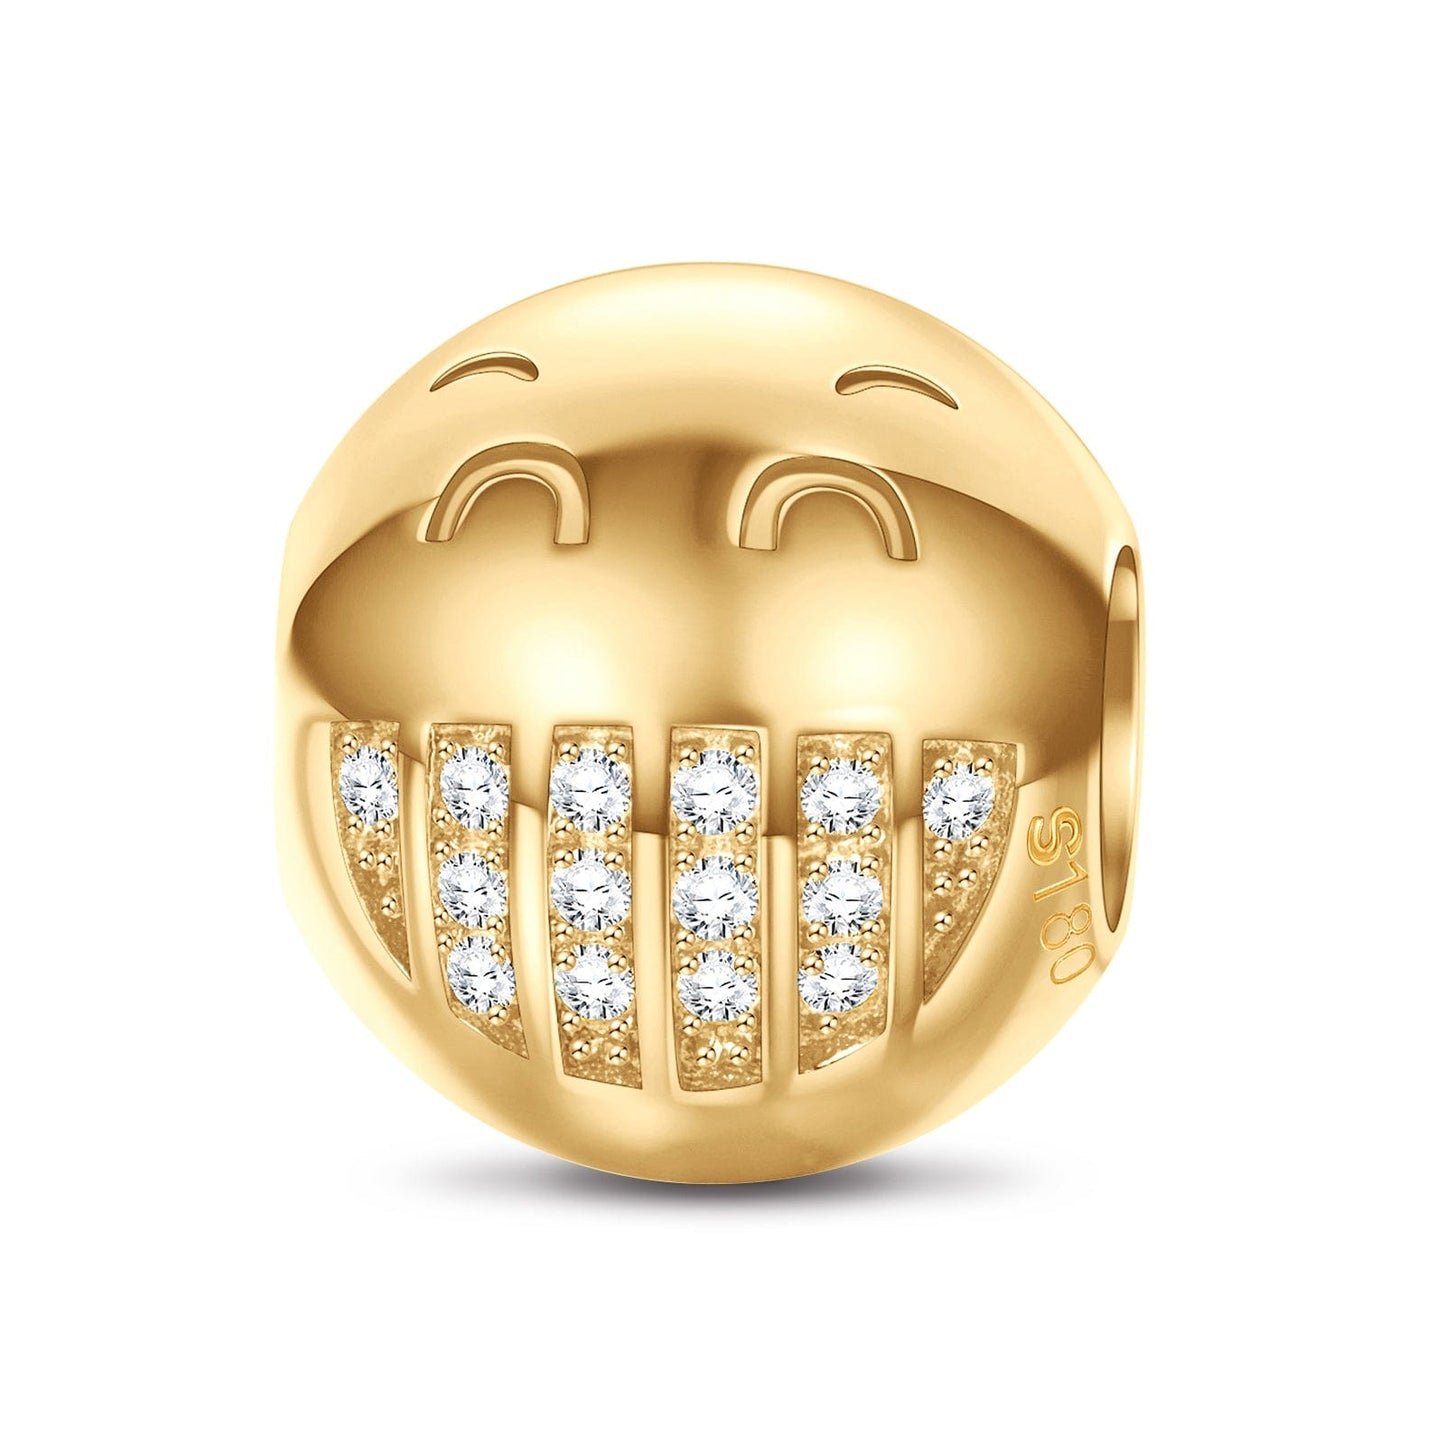 Beaming Emoji Tarnish-resistant Silver Charms In 14K Gold Plated